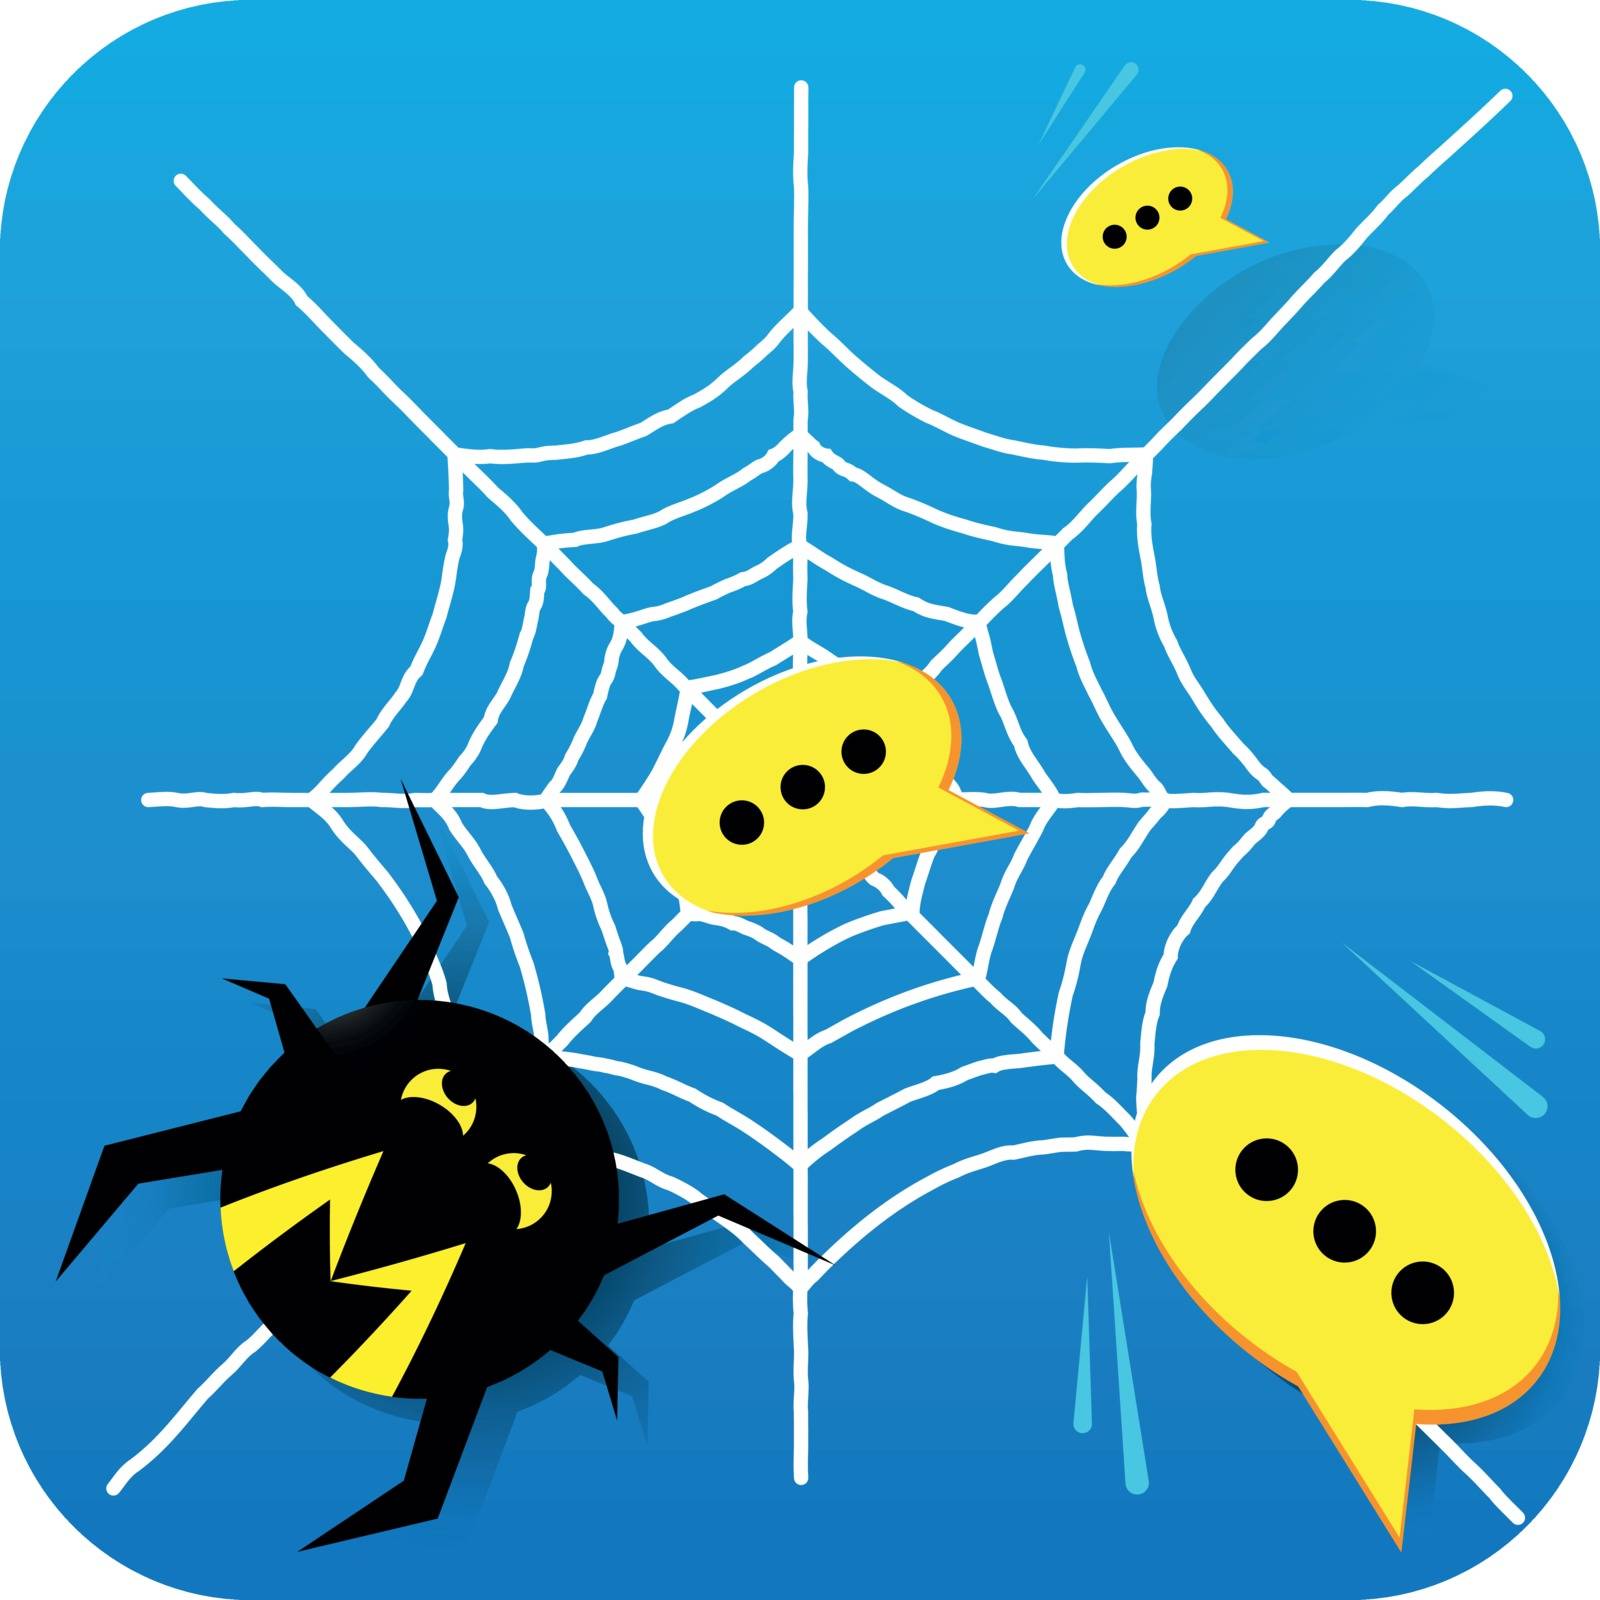 Spam Messages Spider by clusterx